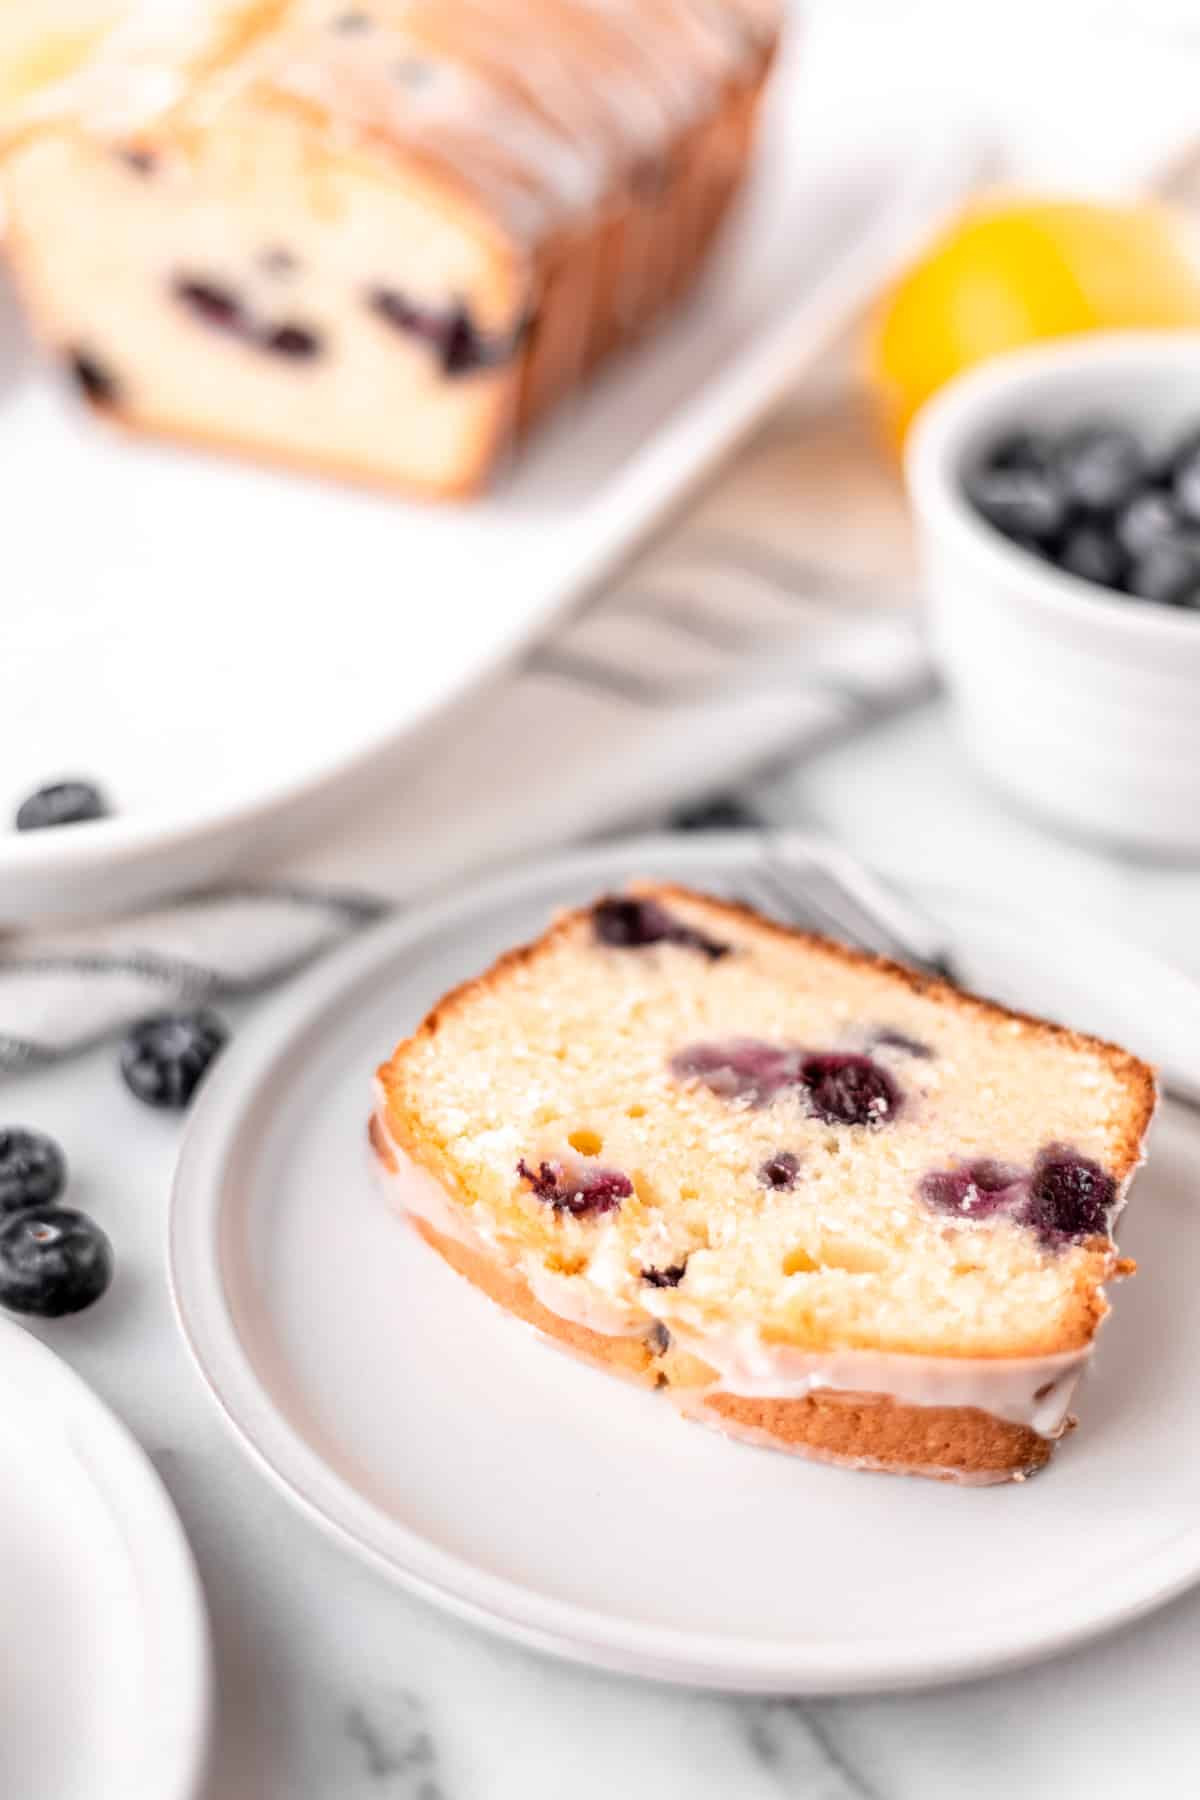 A slice of lemon blueberry pound cake on a small white plate with the remaining cake, a bowl of blueberries and a lemon in the background.